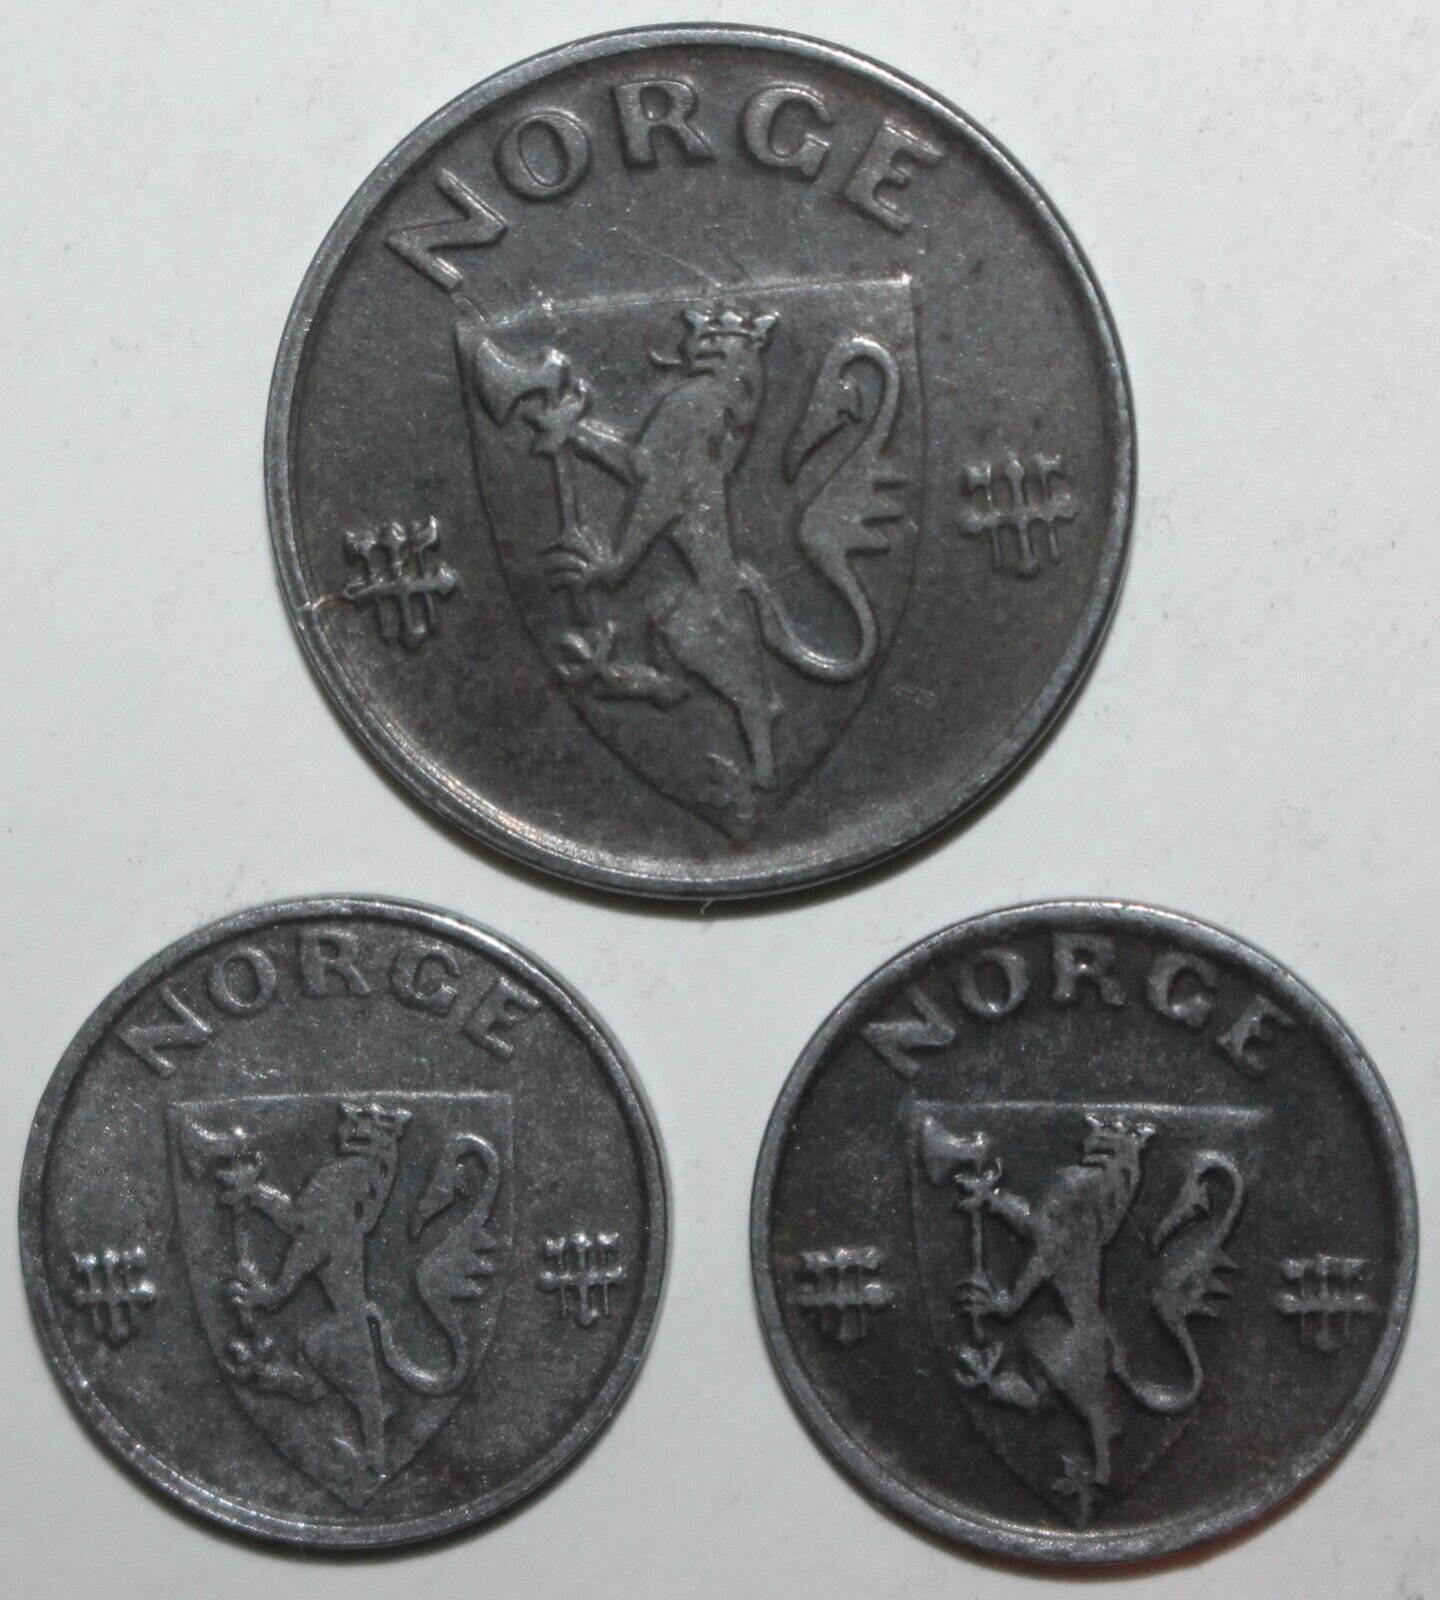 Norwegian WWII German Occupation 3 Coin Lot 1 2 Øre 1942 1943 1944 One Two Ore Без бренда